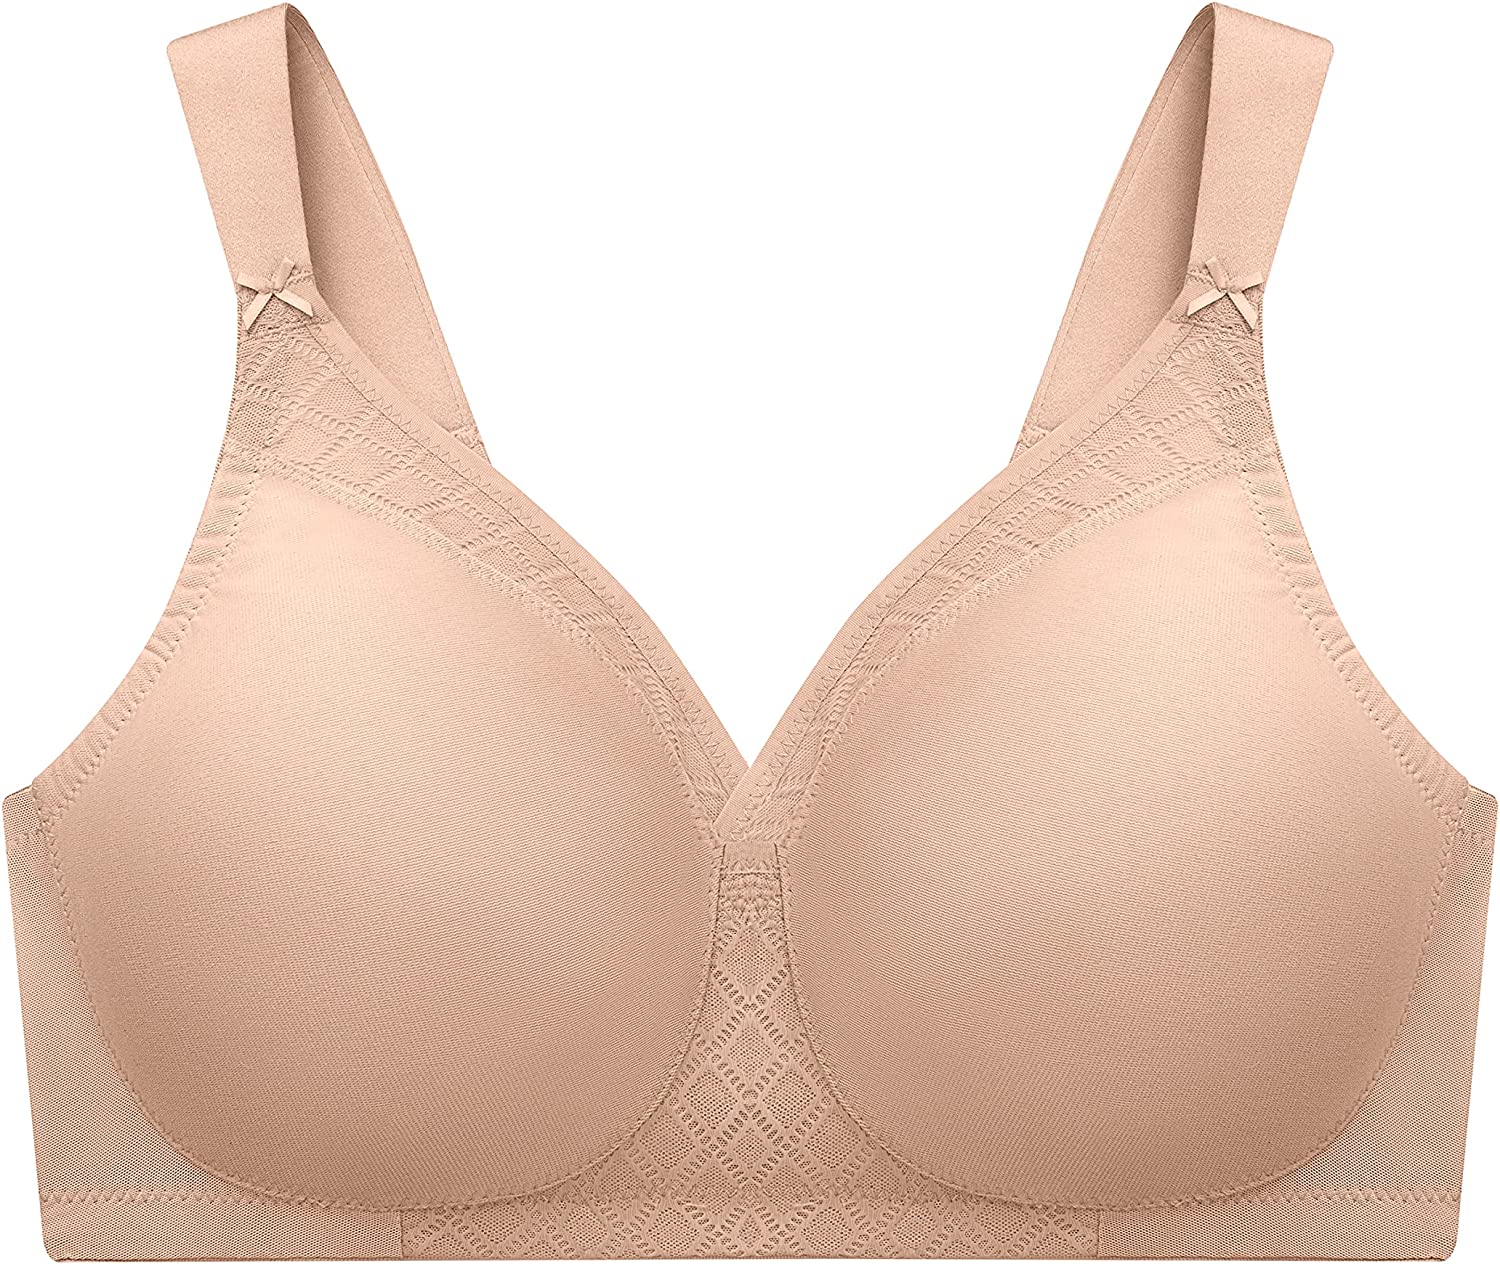 Shop BALI Underwire Bras, Wire Free Bras and Panties